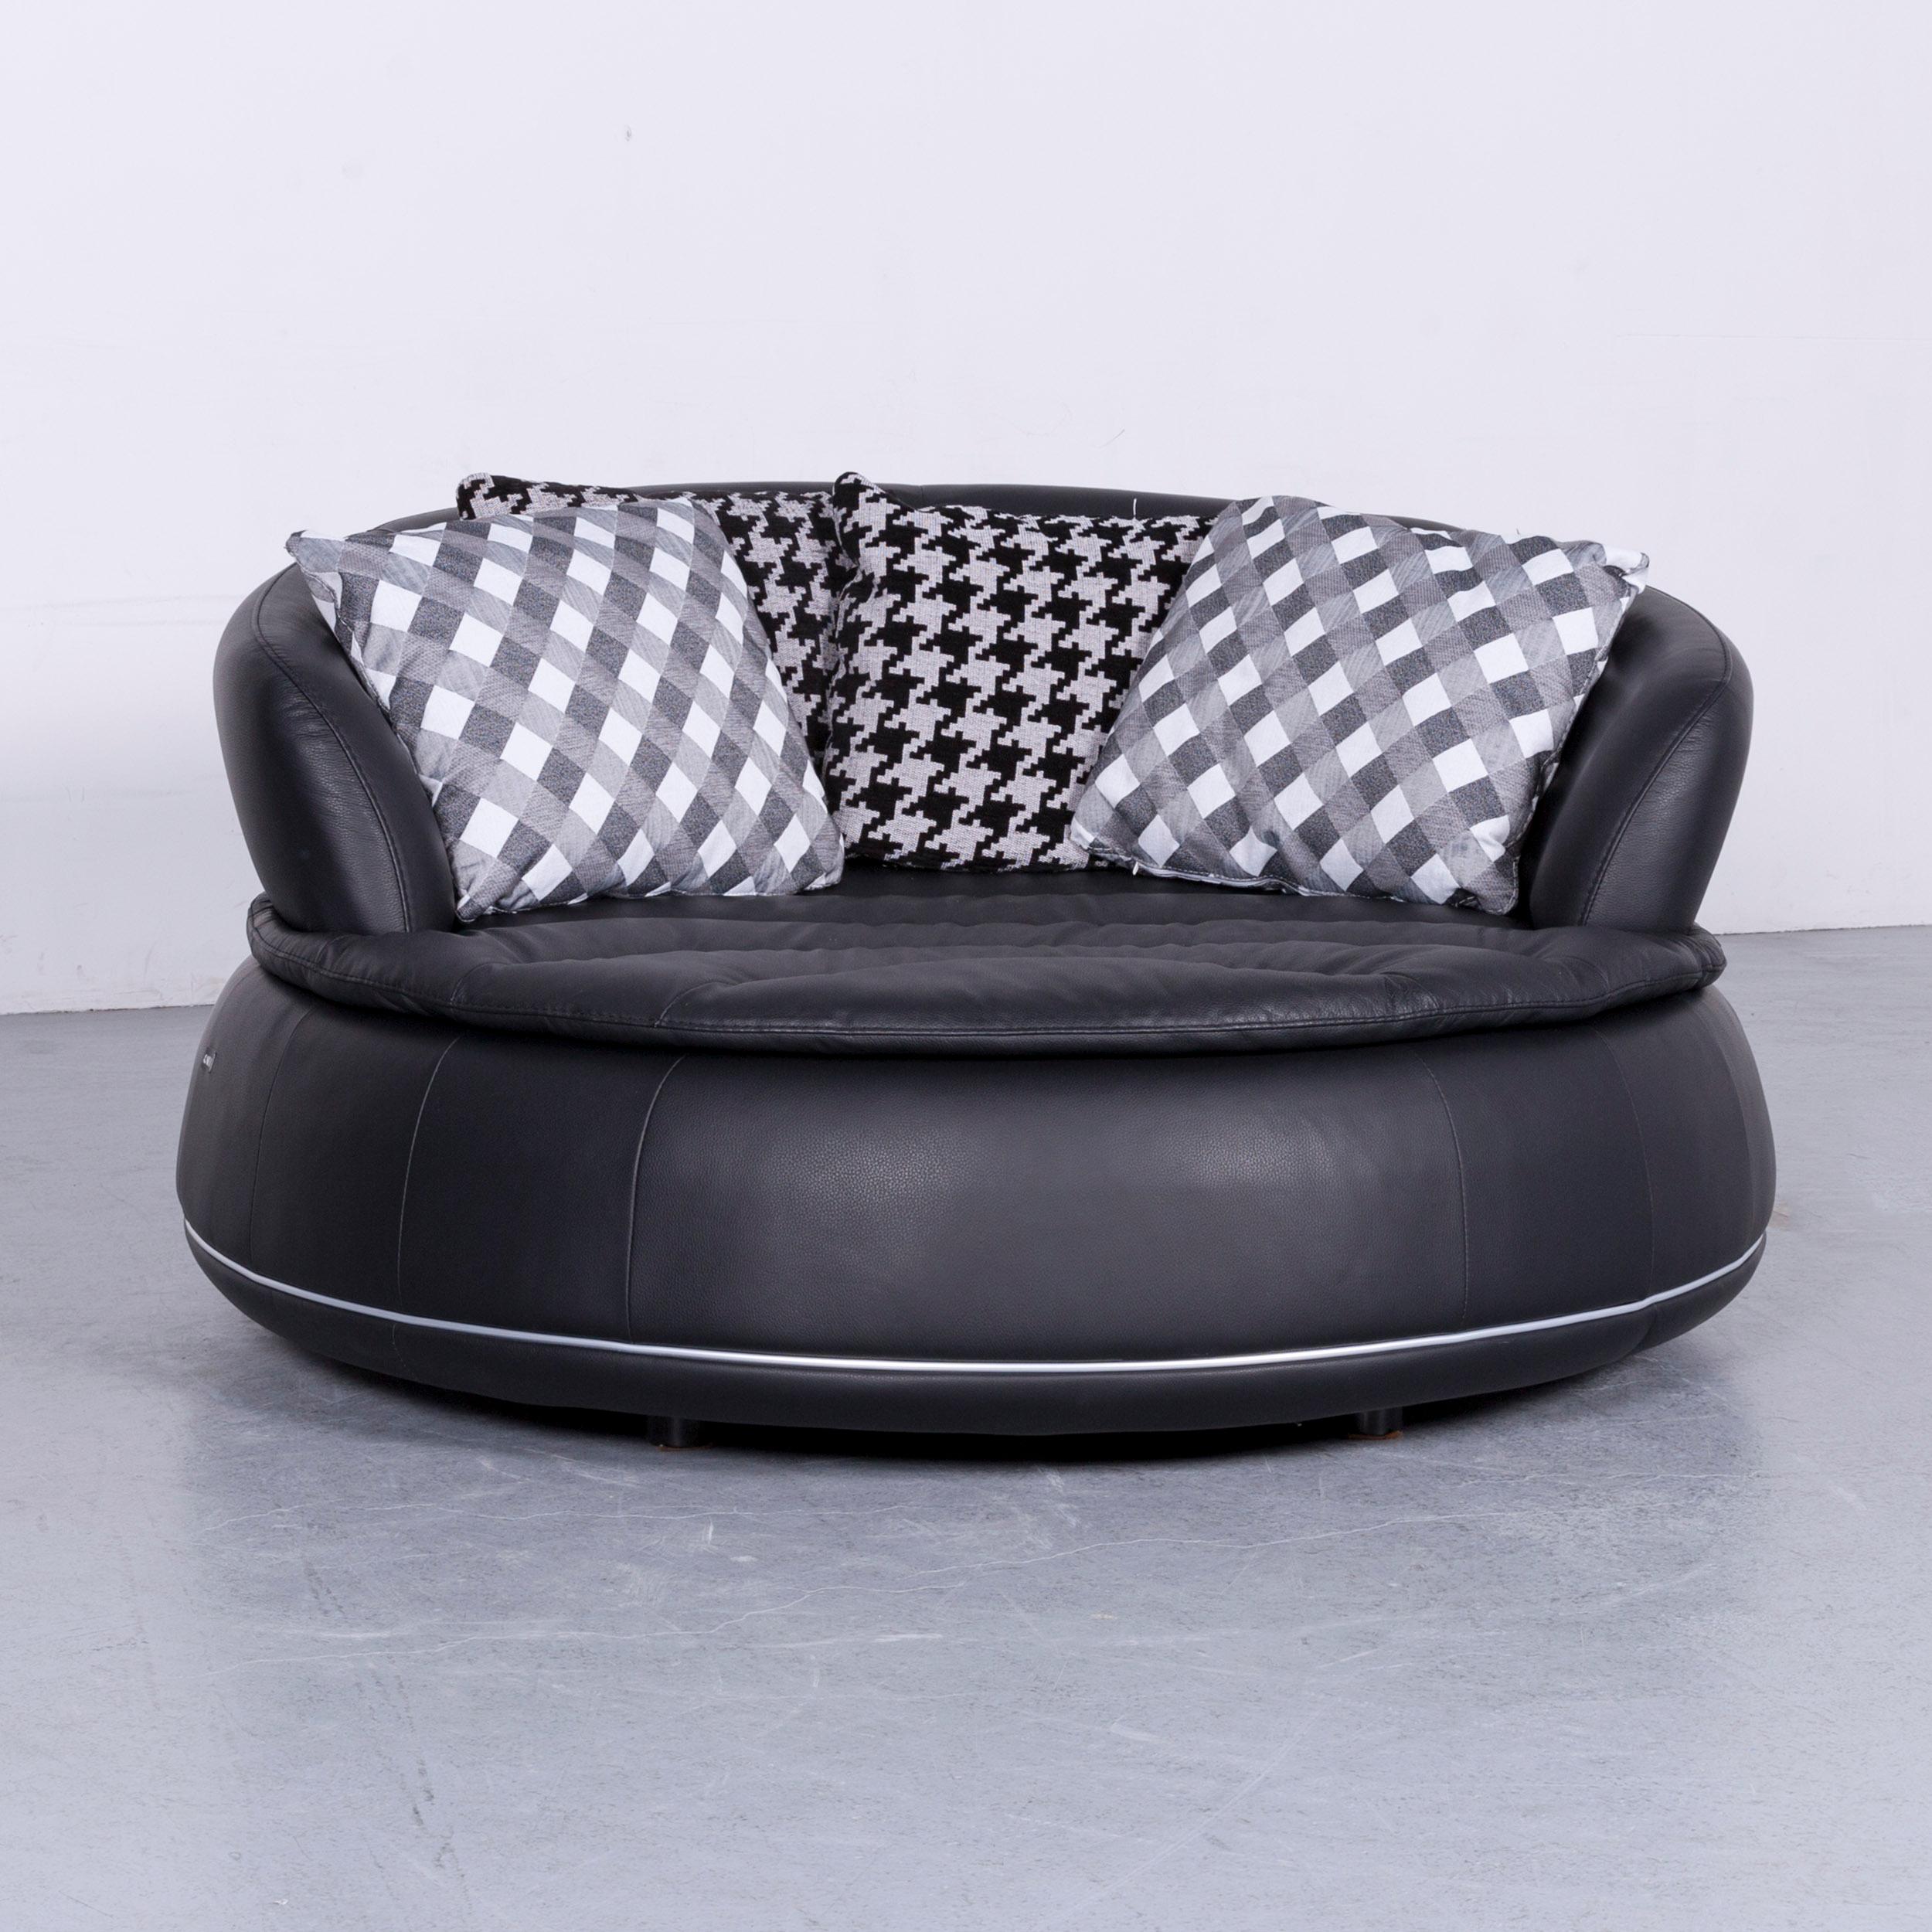 We bring to you a Nieri Espace loveseat designer sofa black two-seat round lounge couch.